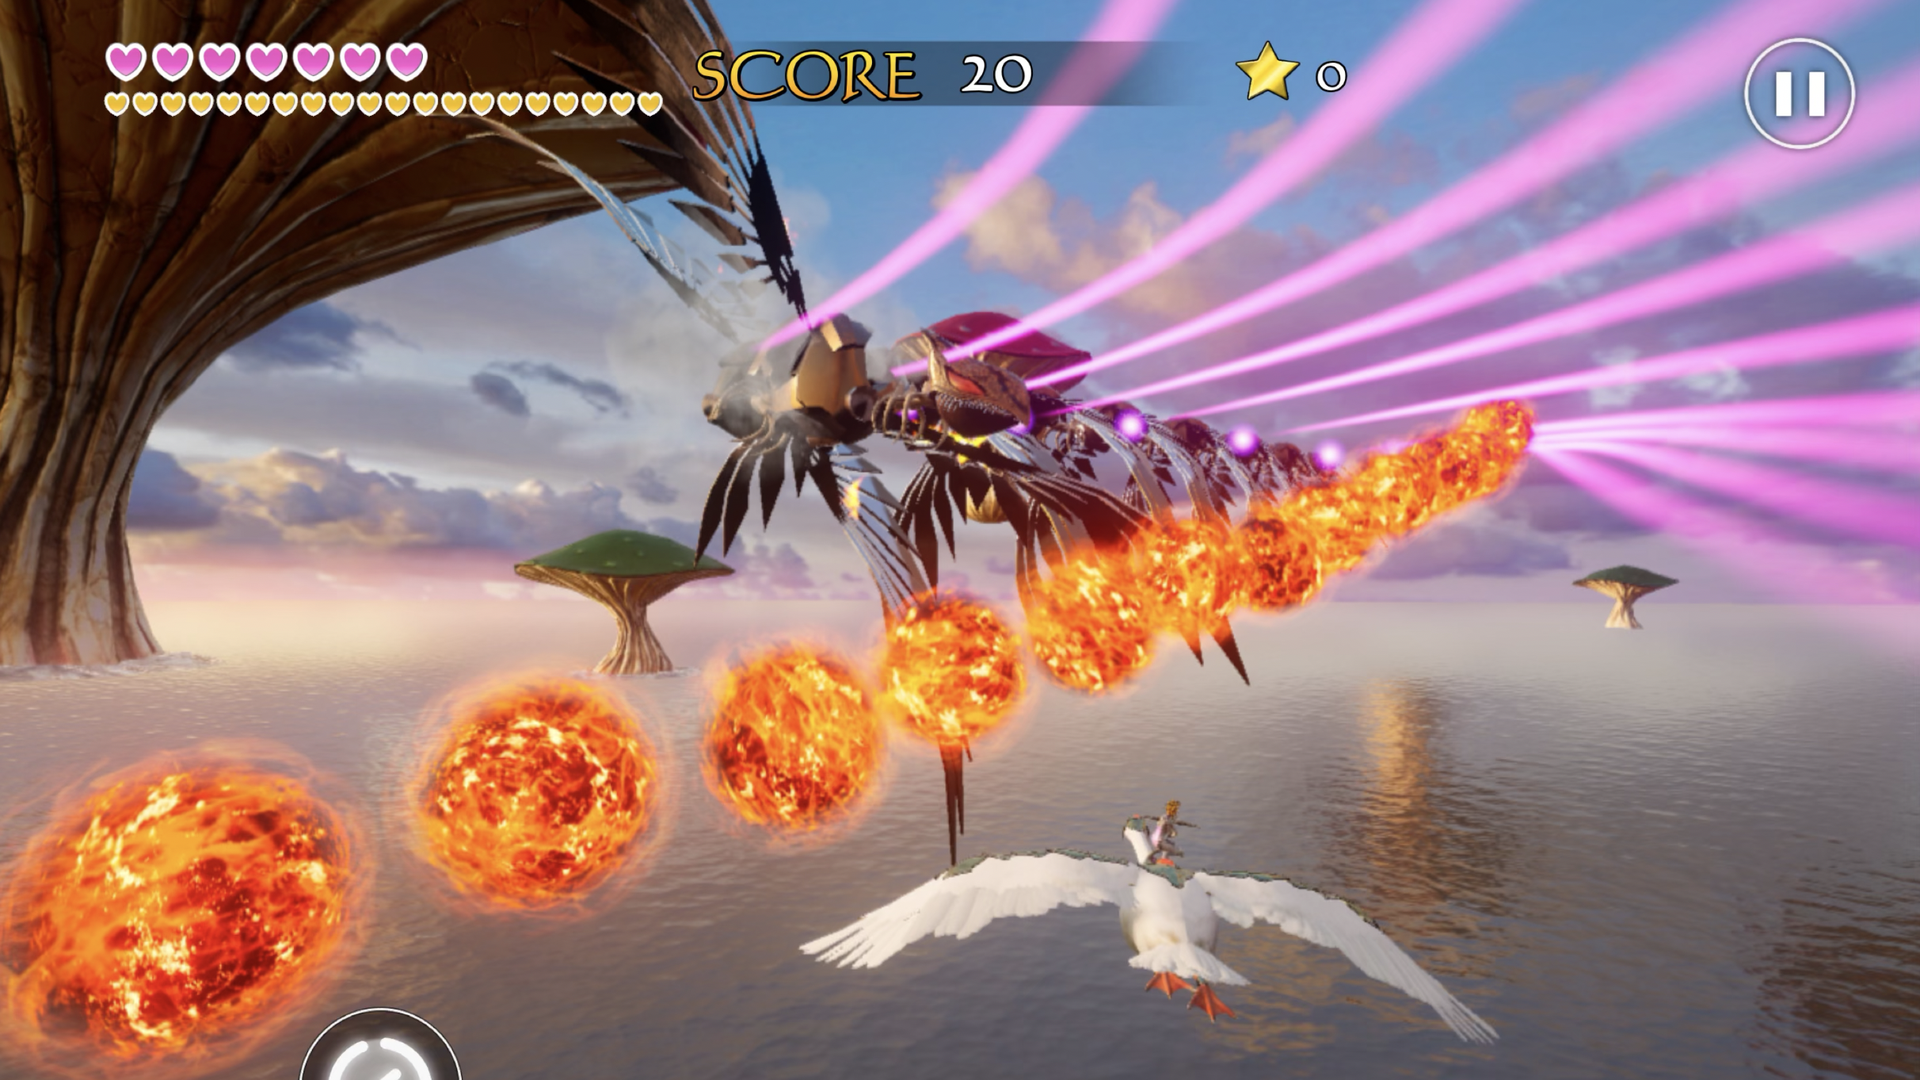 Video game screenshot of a mid-air battle involving a flying bird, fireballs and pink lasers